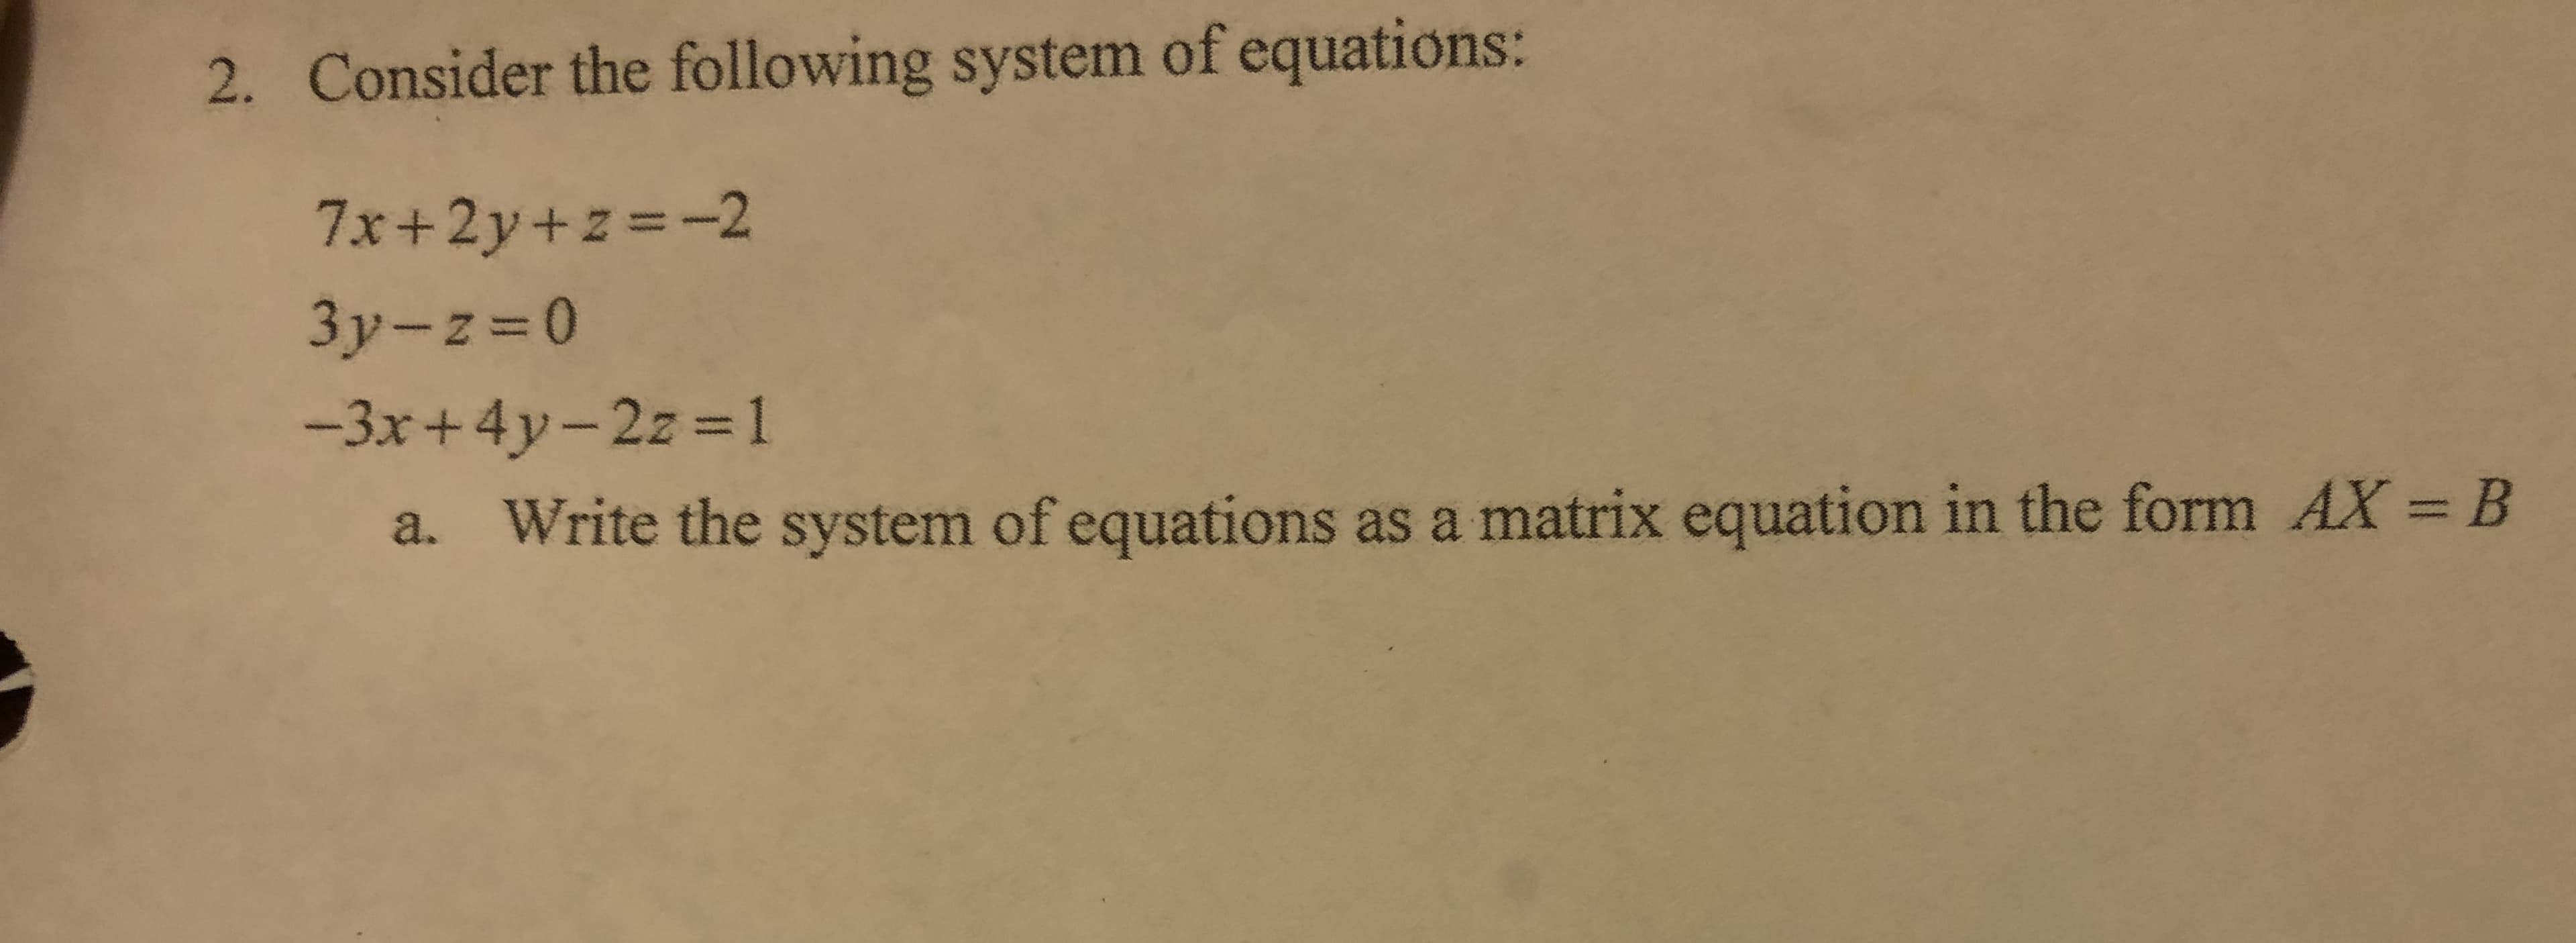 2. Consider the following system of equations:
7x+2y+z=-2
3y-z=D0
-3x+4y-2z 1
a. Write the system of equations as a matrix equation in the form AX = B
